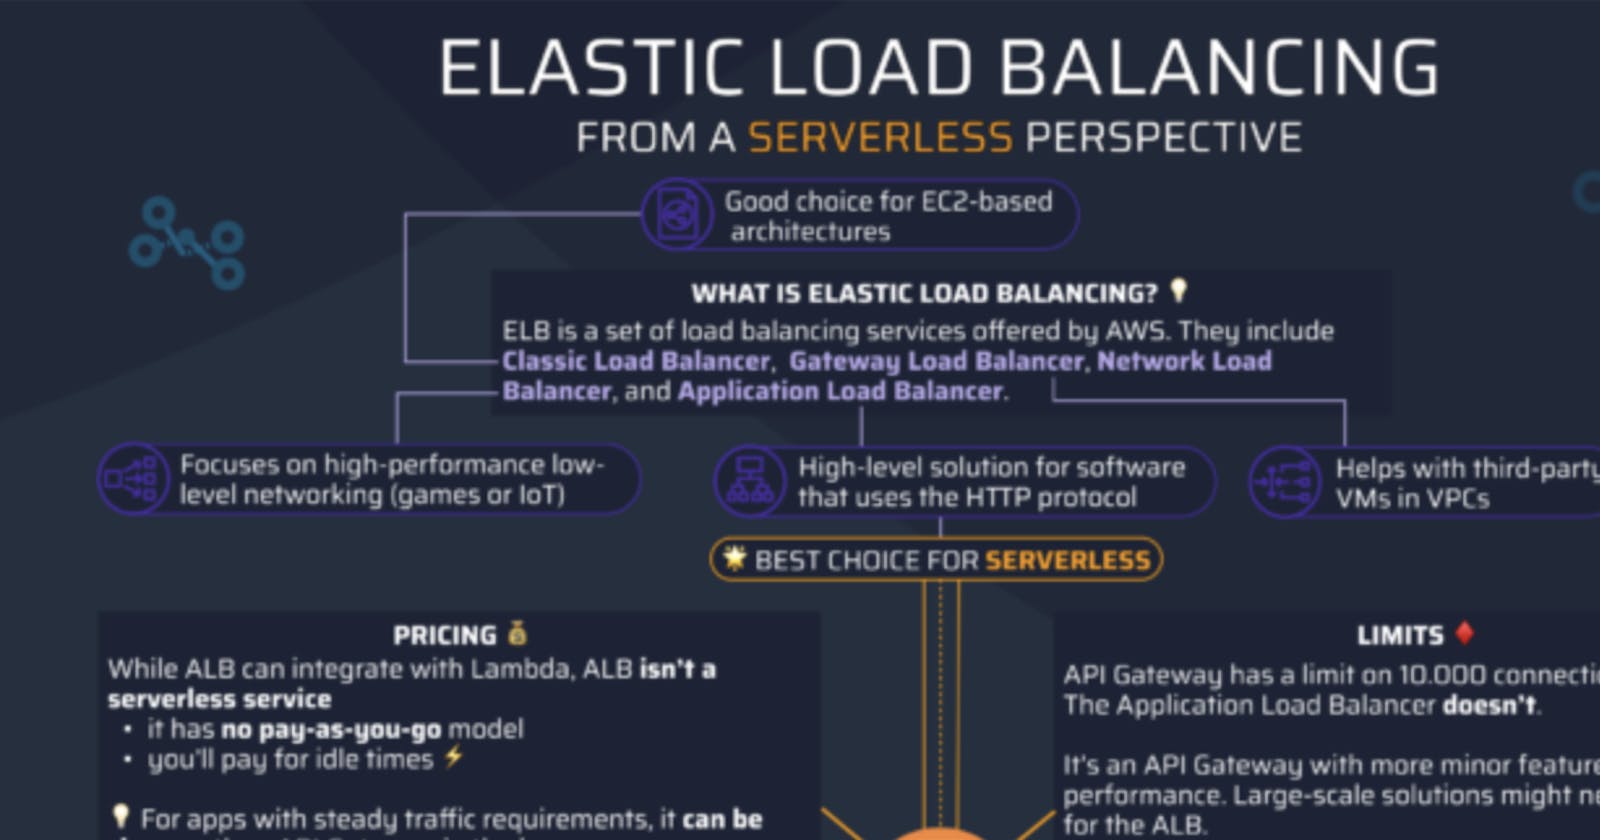 [Infographic] AWS Elastic Load Balancing from a Serverless perspective